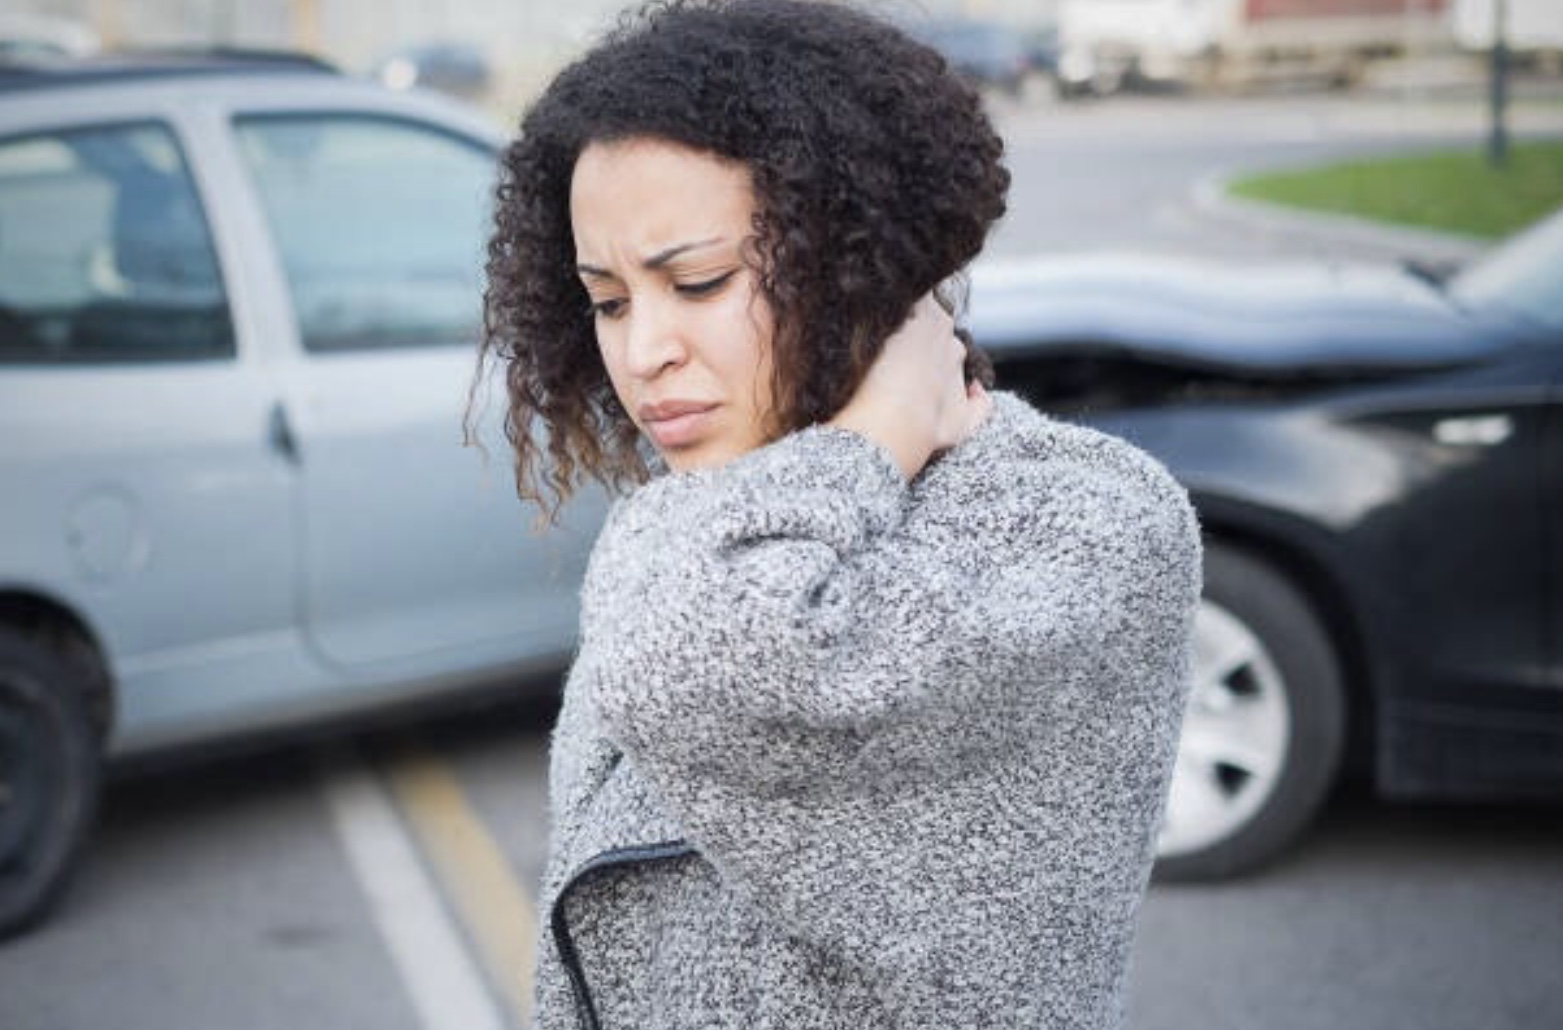 4 Common Mistakes People Make After an Accident